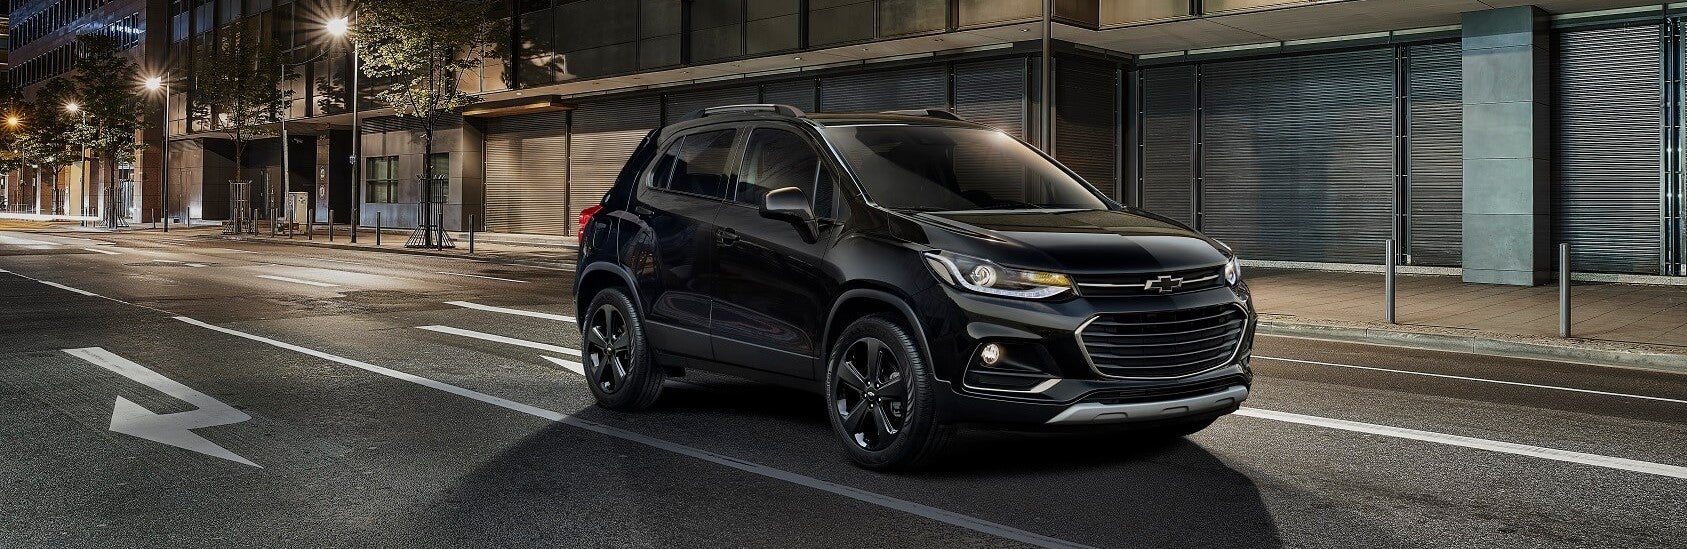 Chevy Trax Aftermarket Accessories 